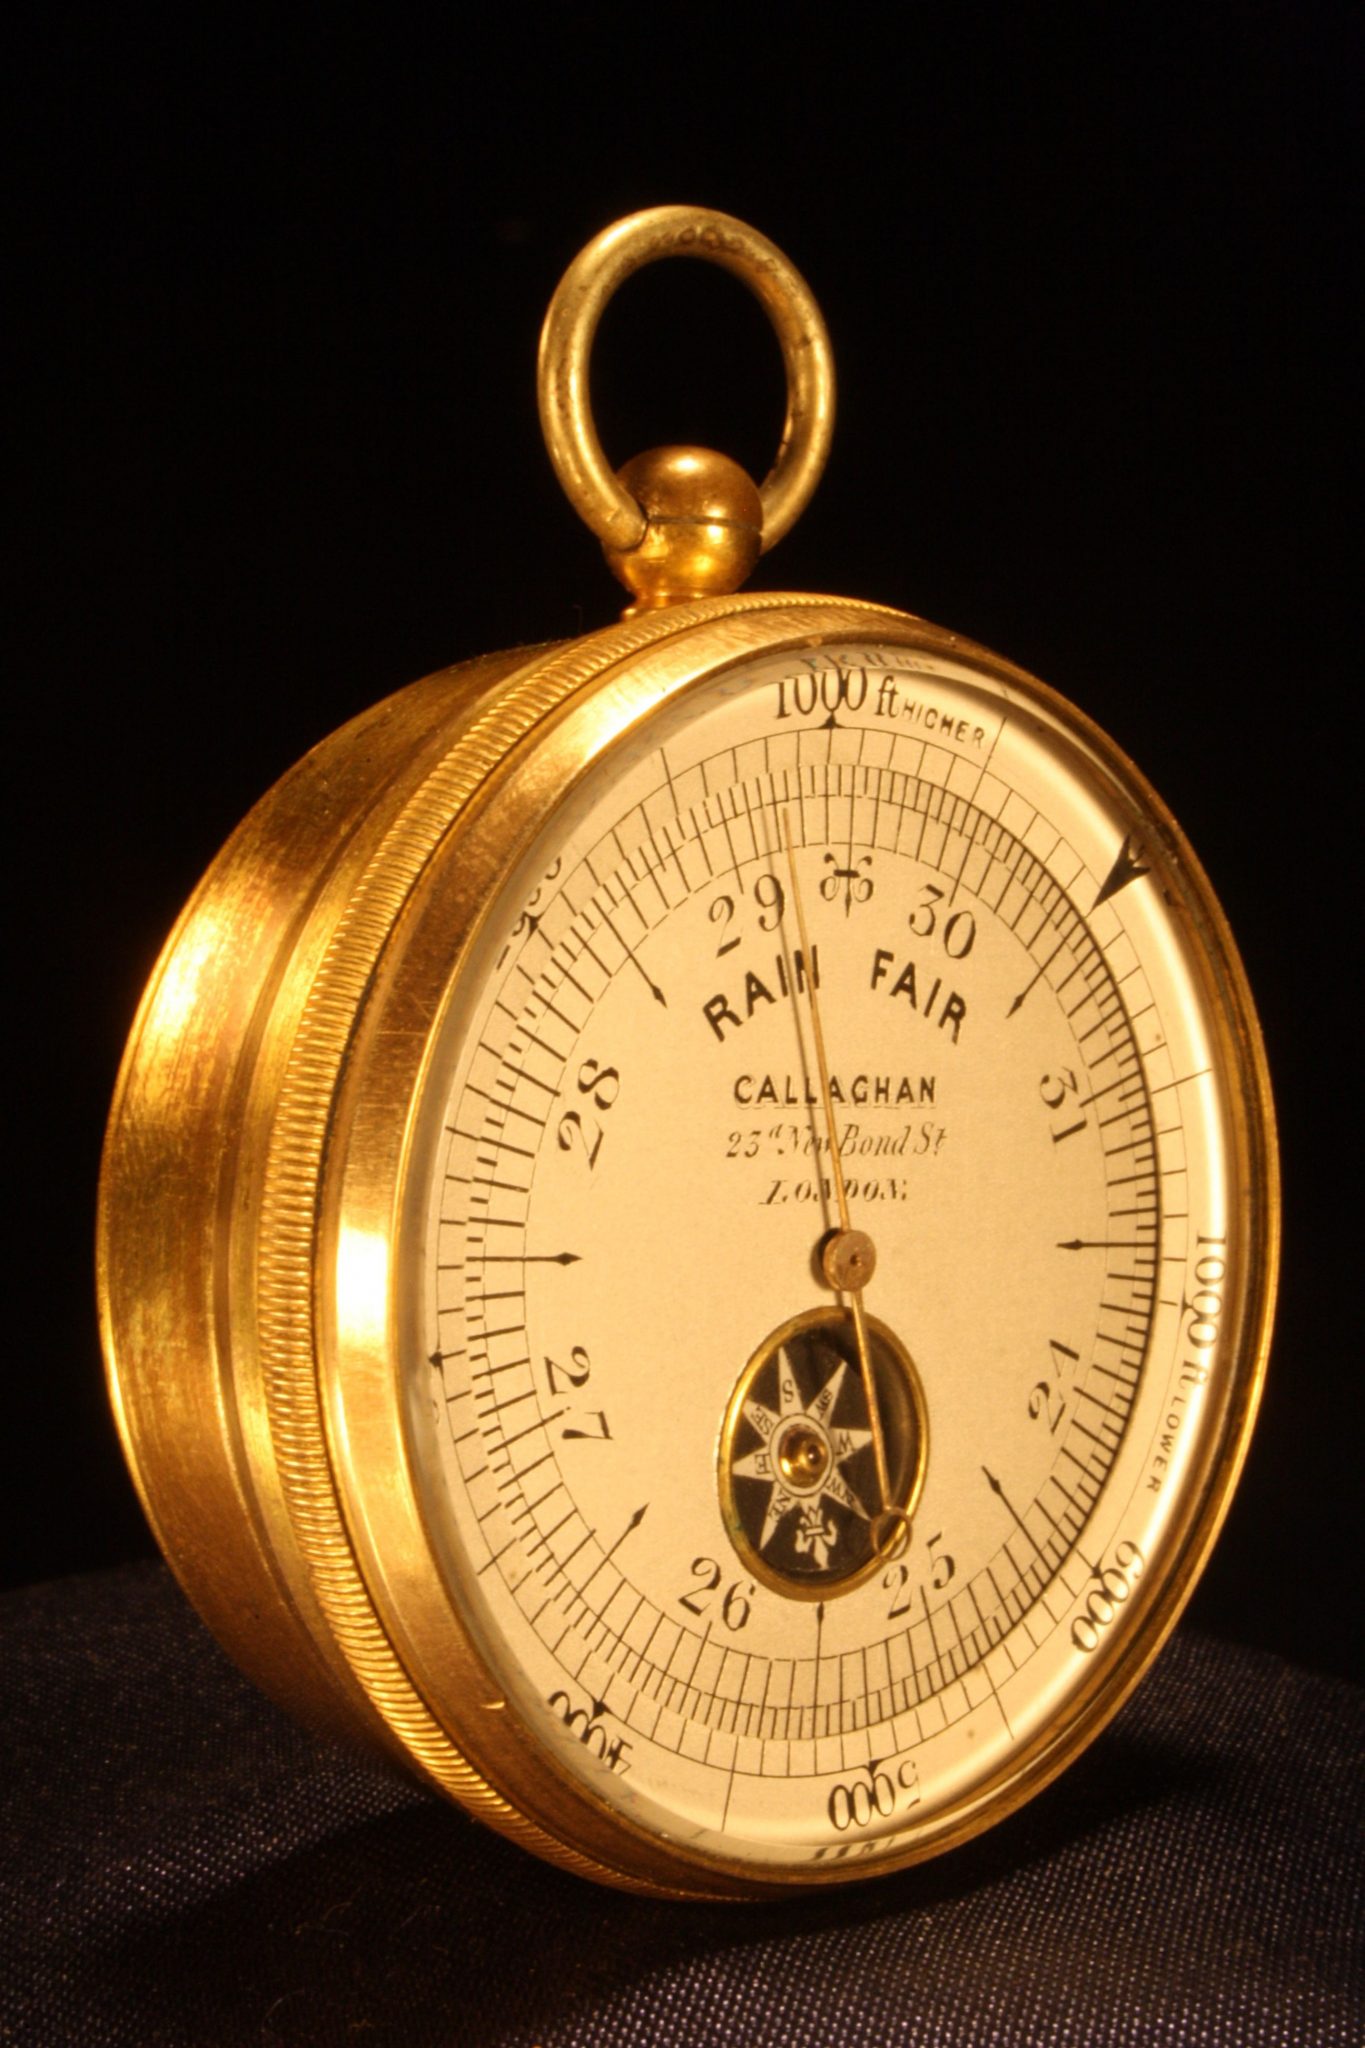 Image of Callaghan Pocket Barometer with Inset Compass